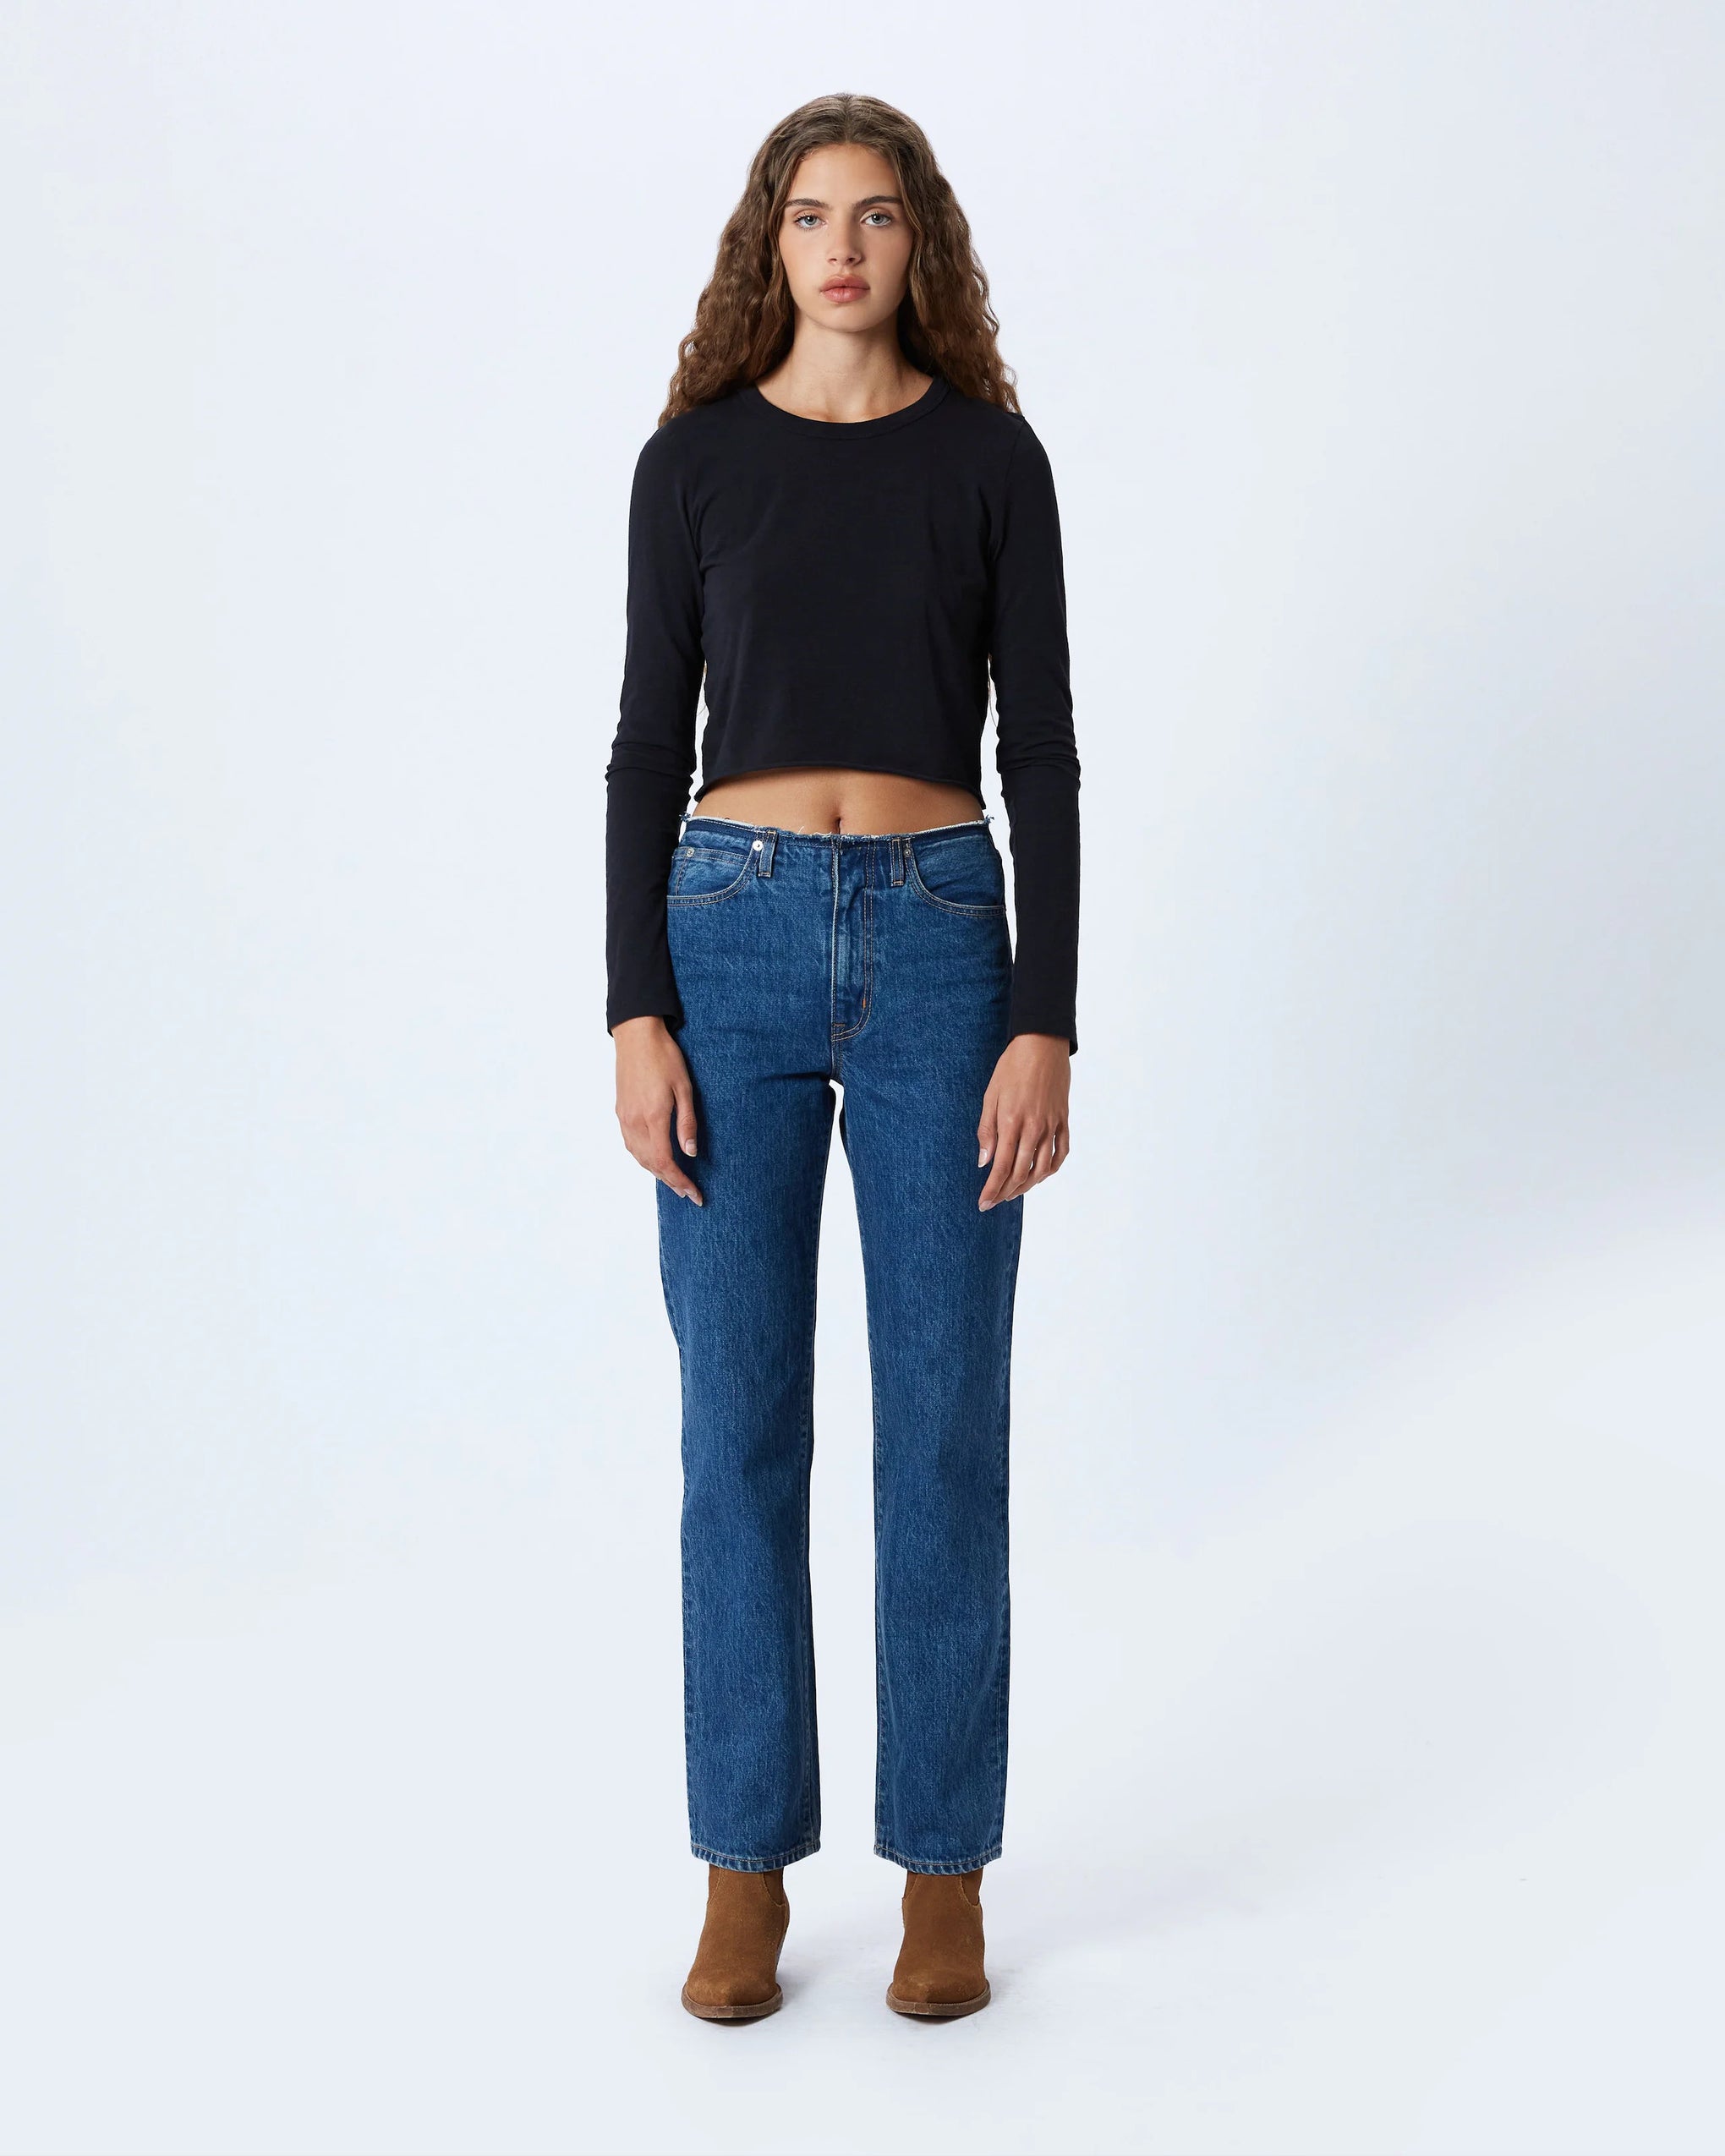 Slvrlake London No Waistband Jean in Claremont available at TNT The New Trend Australia